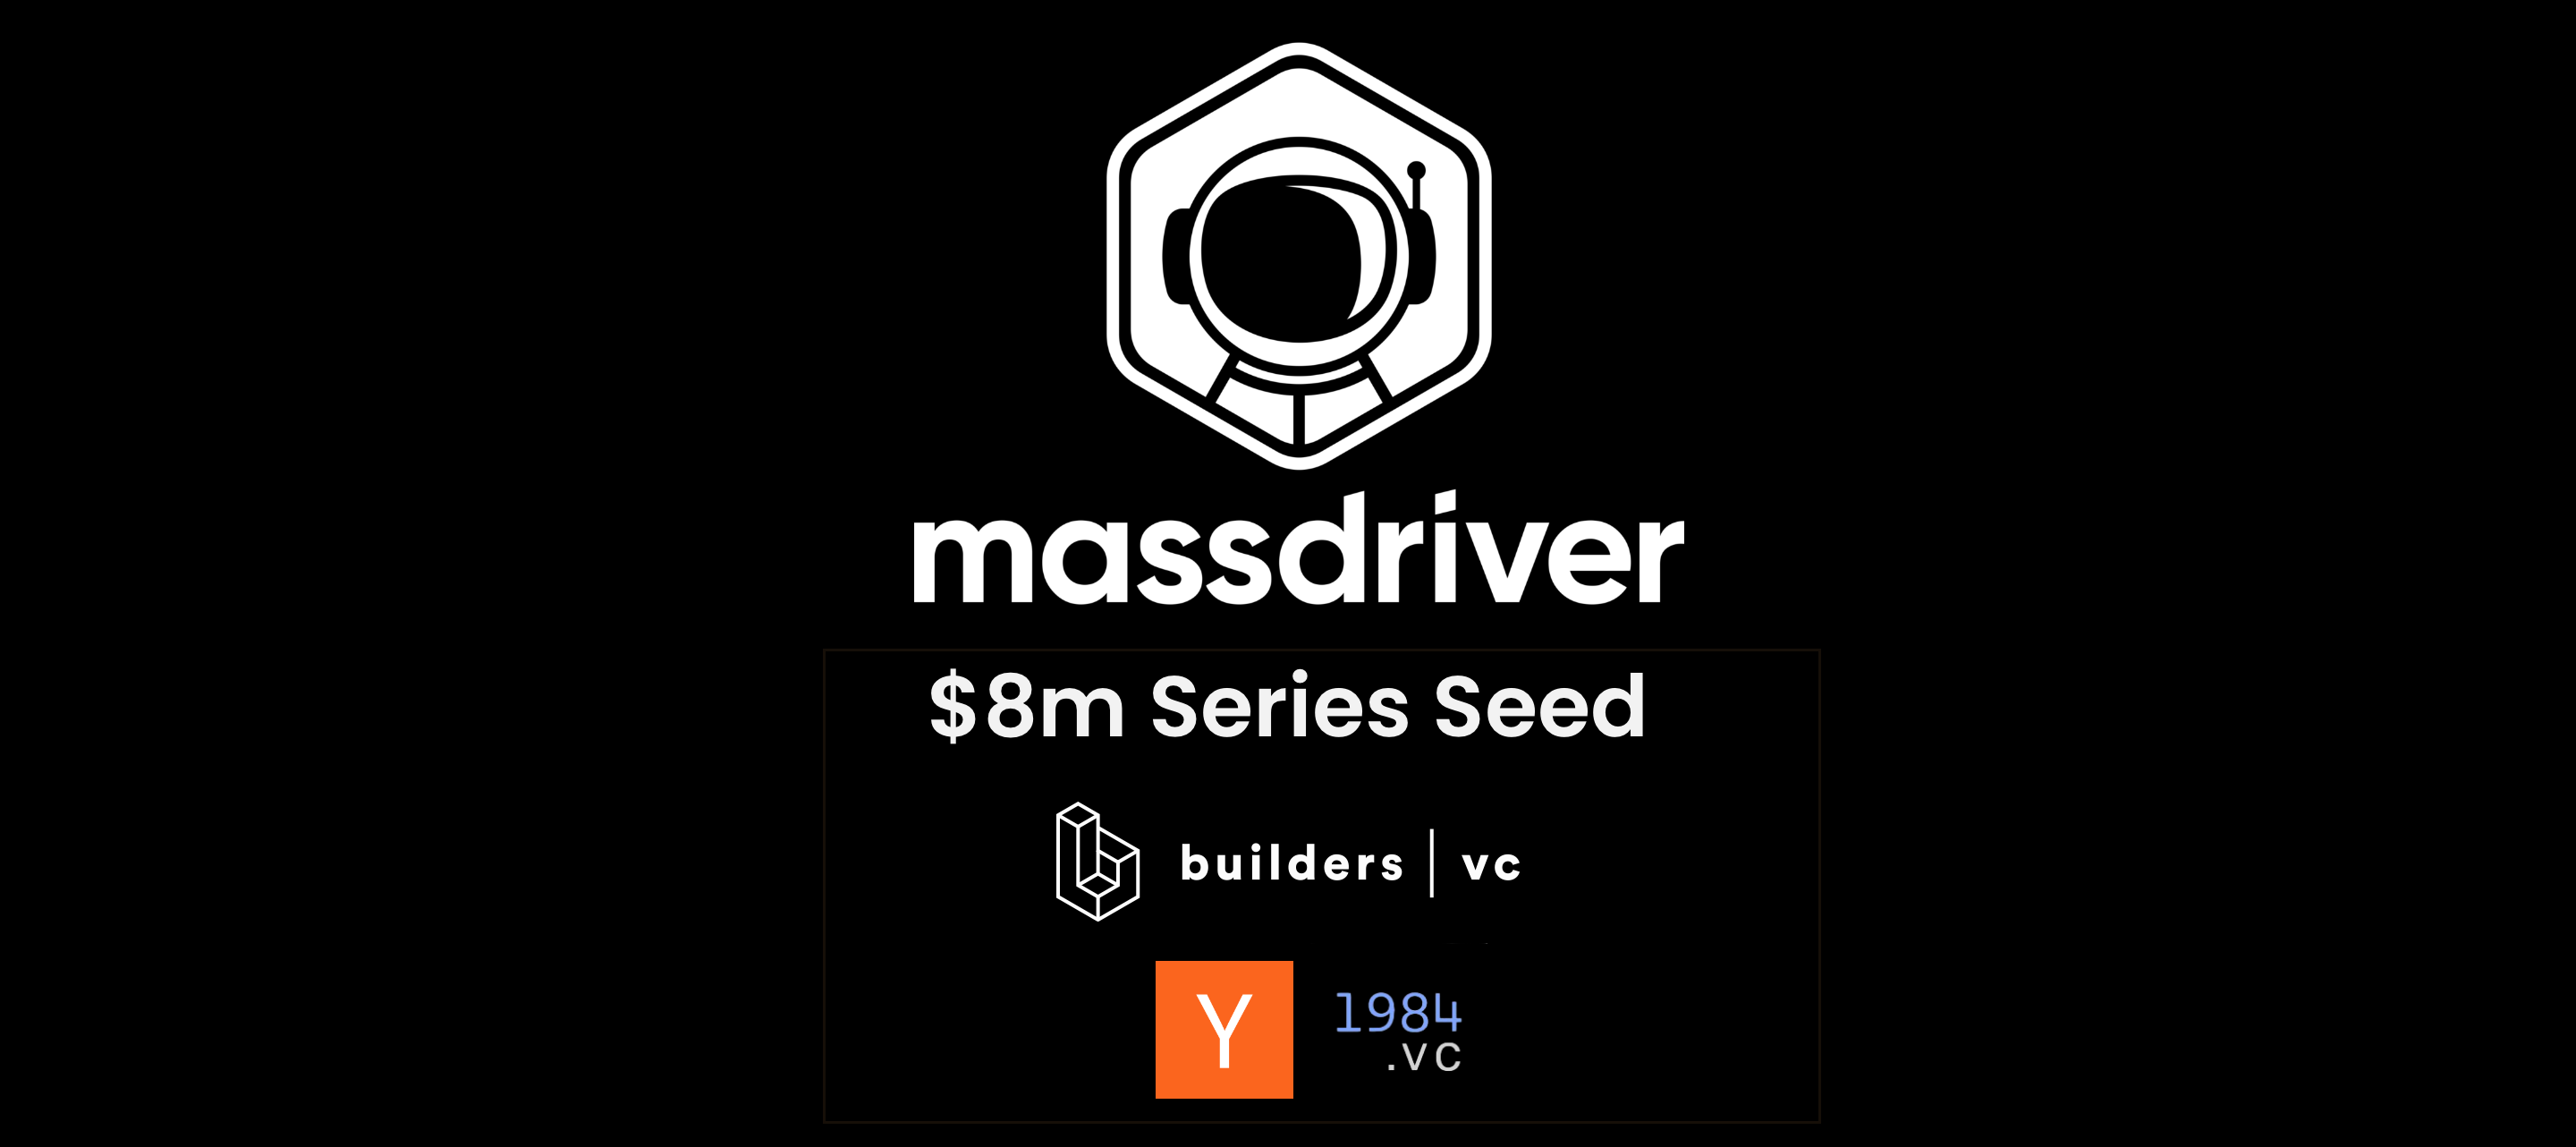 Announcing our $8m Series Seed